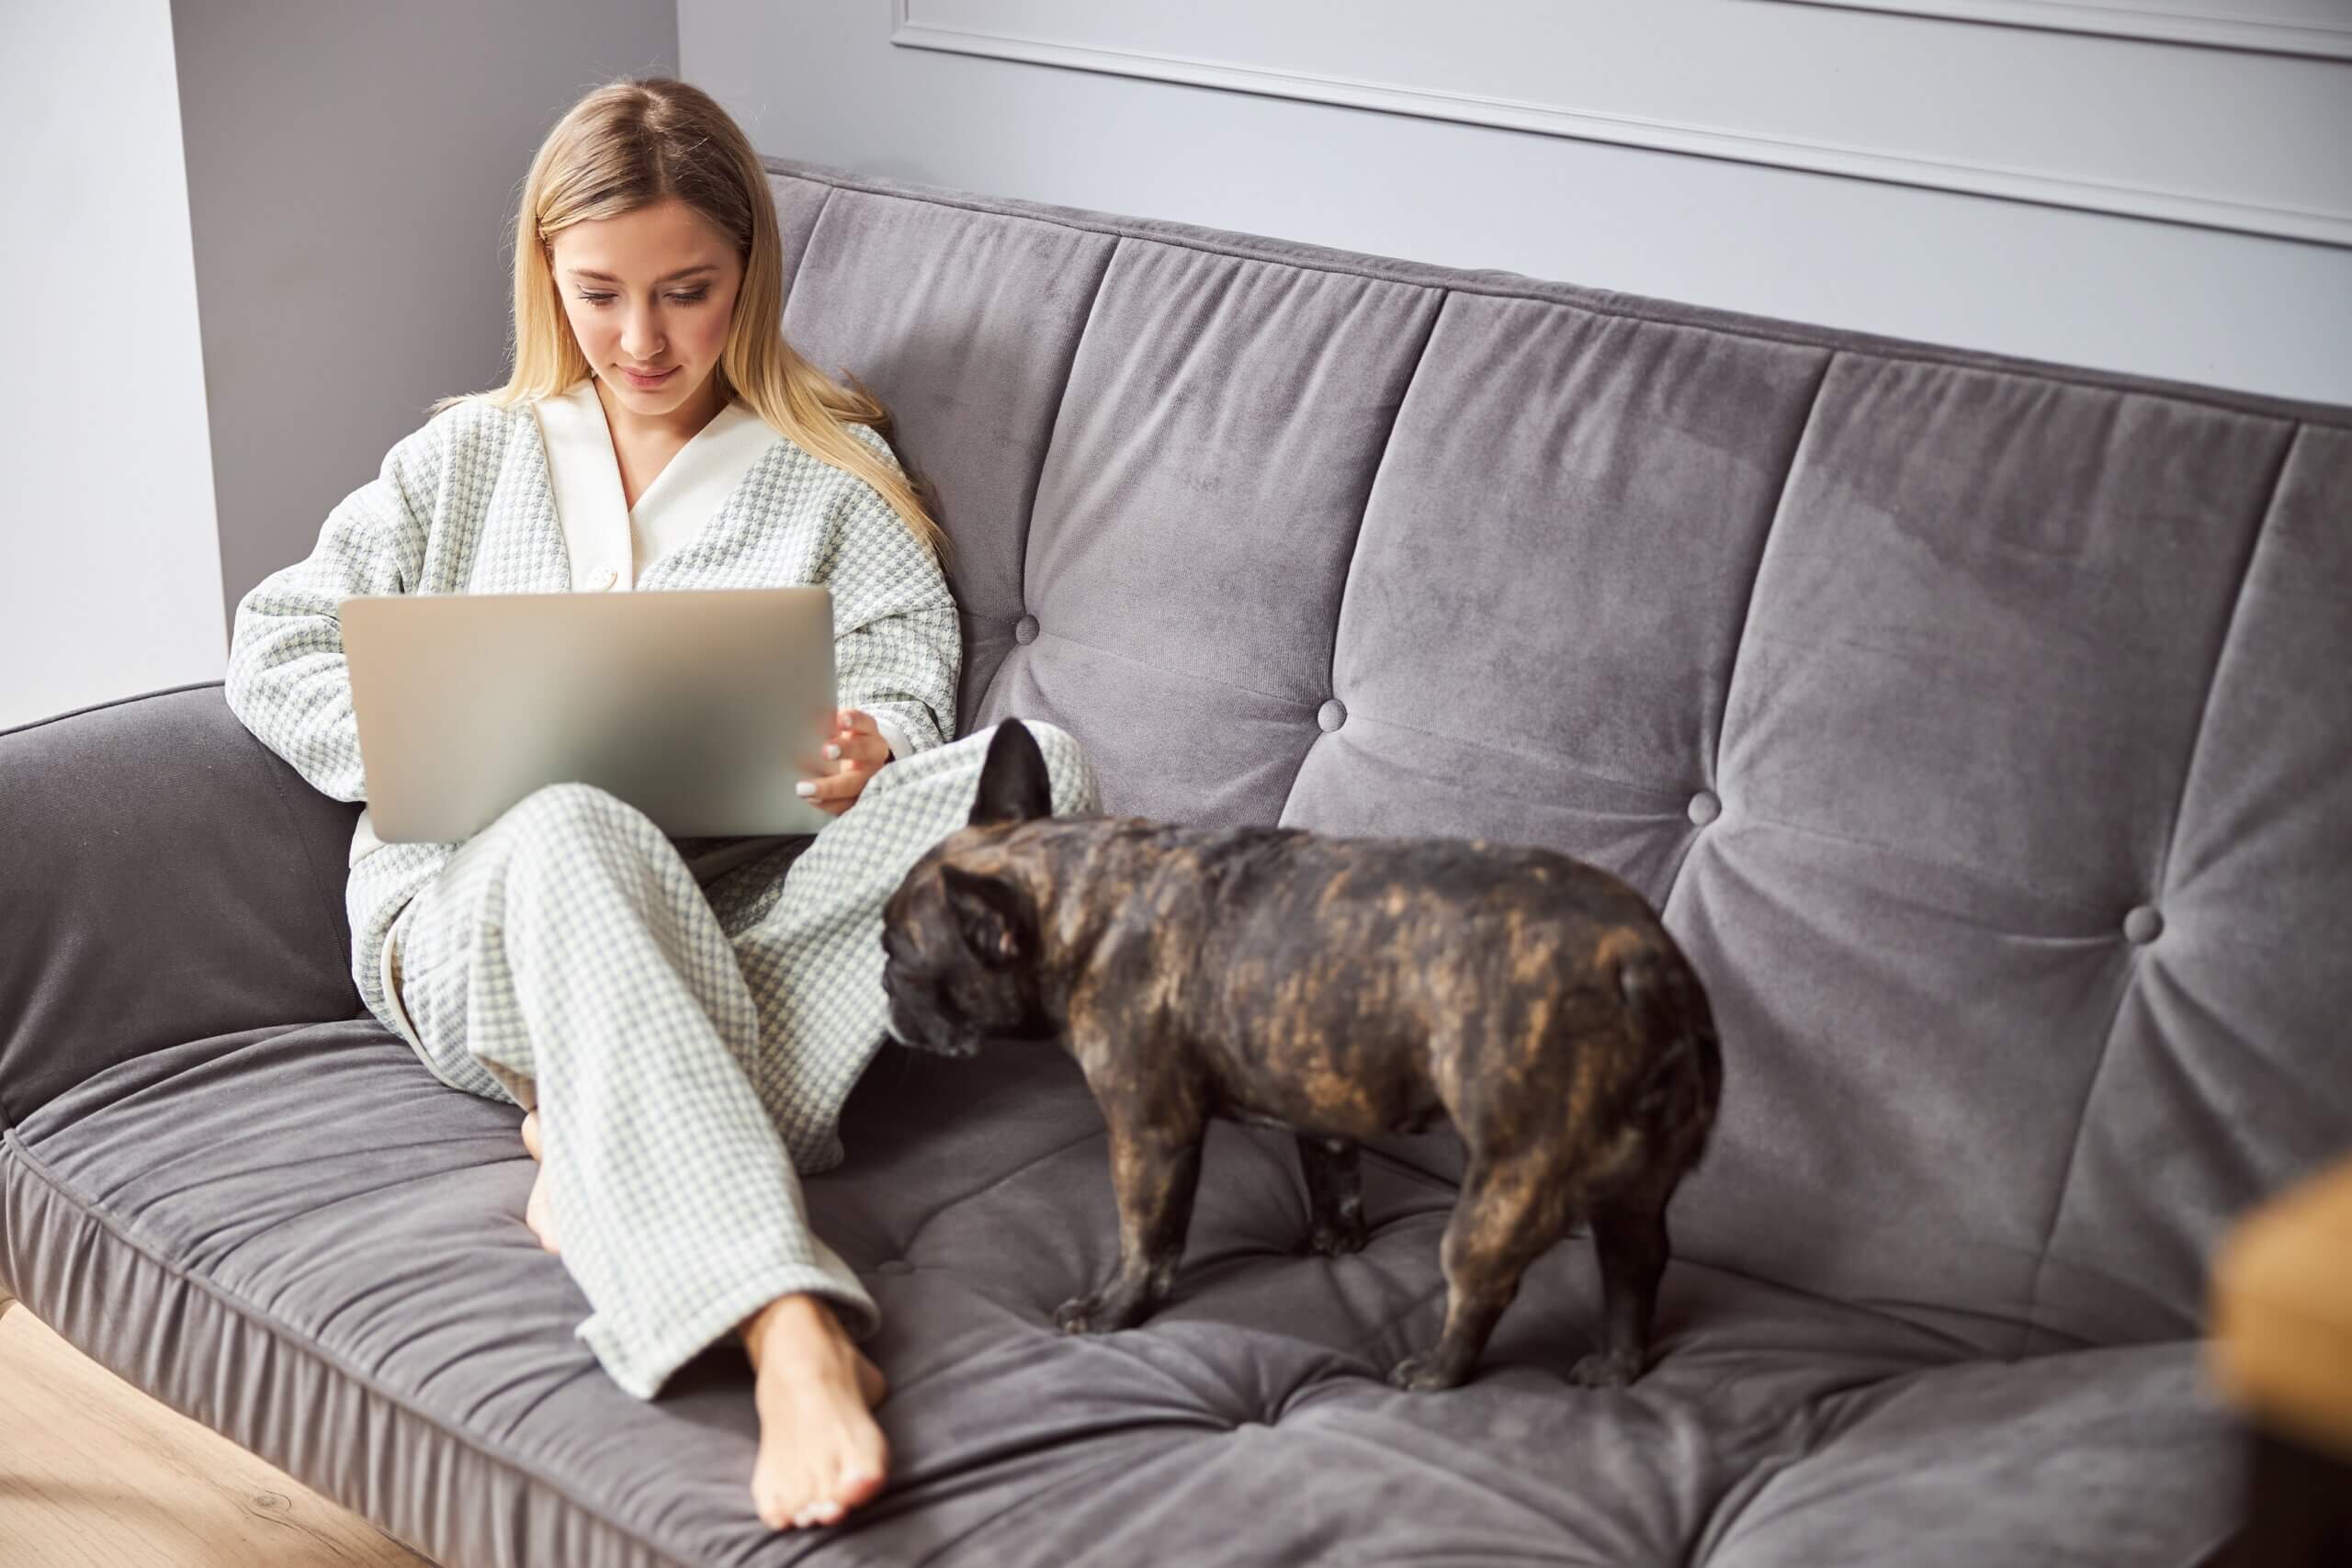 A woman working from her couch with her dog nearby.